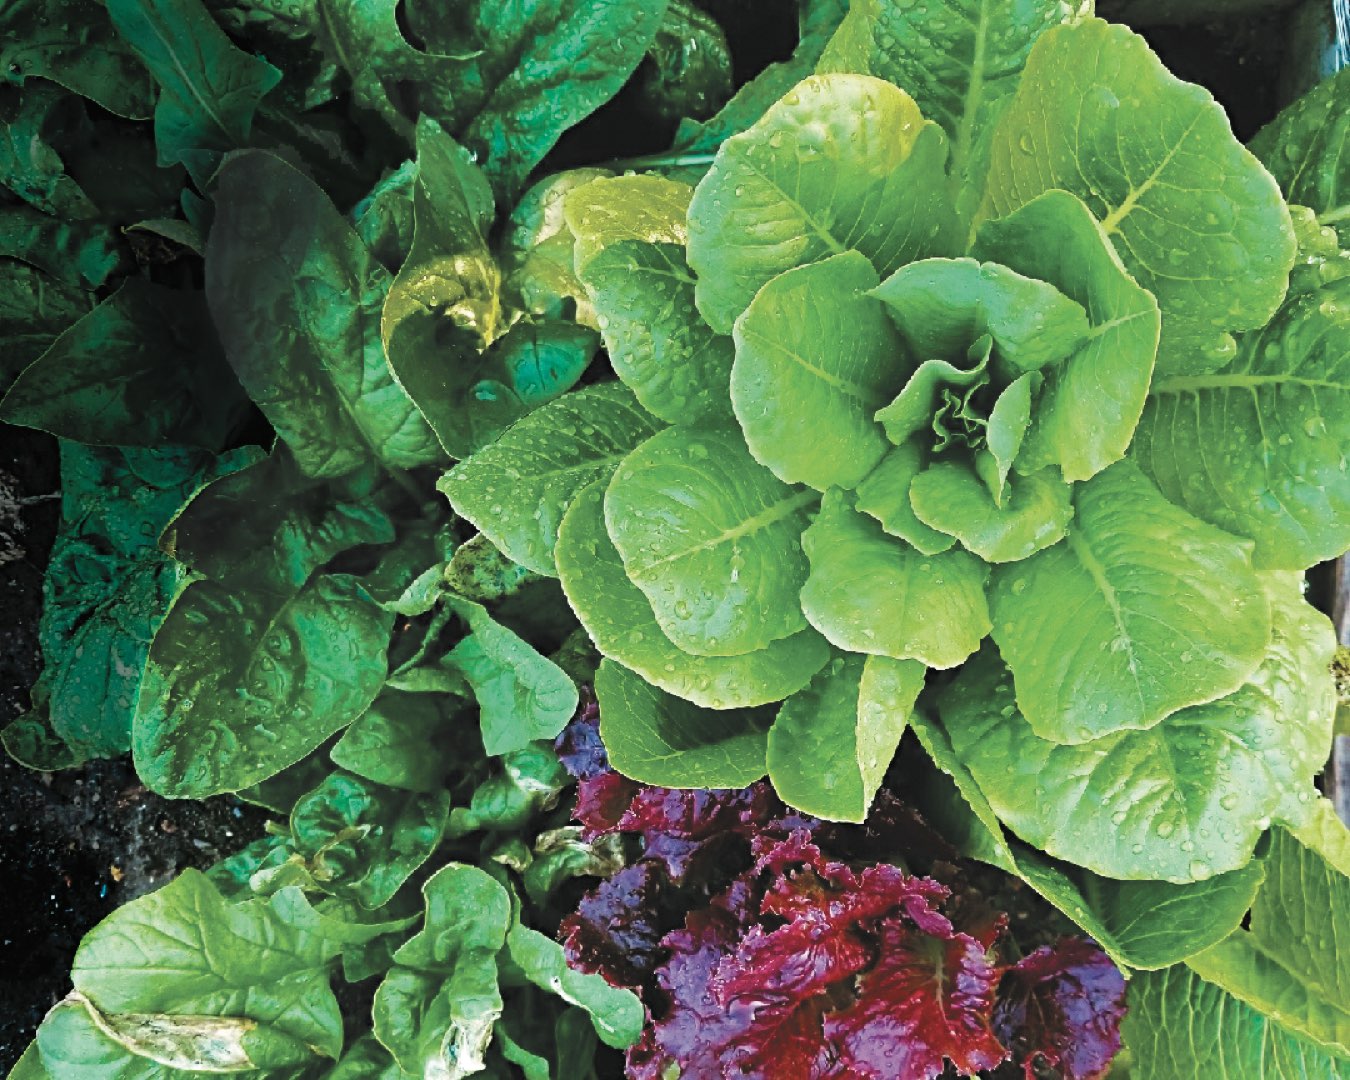 Fresh, vibrant green and purple leafy vegetables in the campus garden